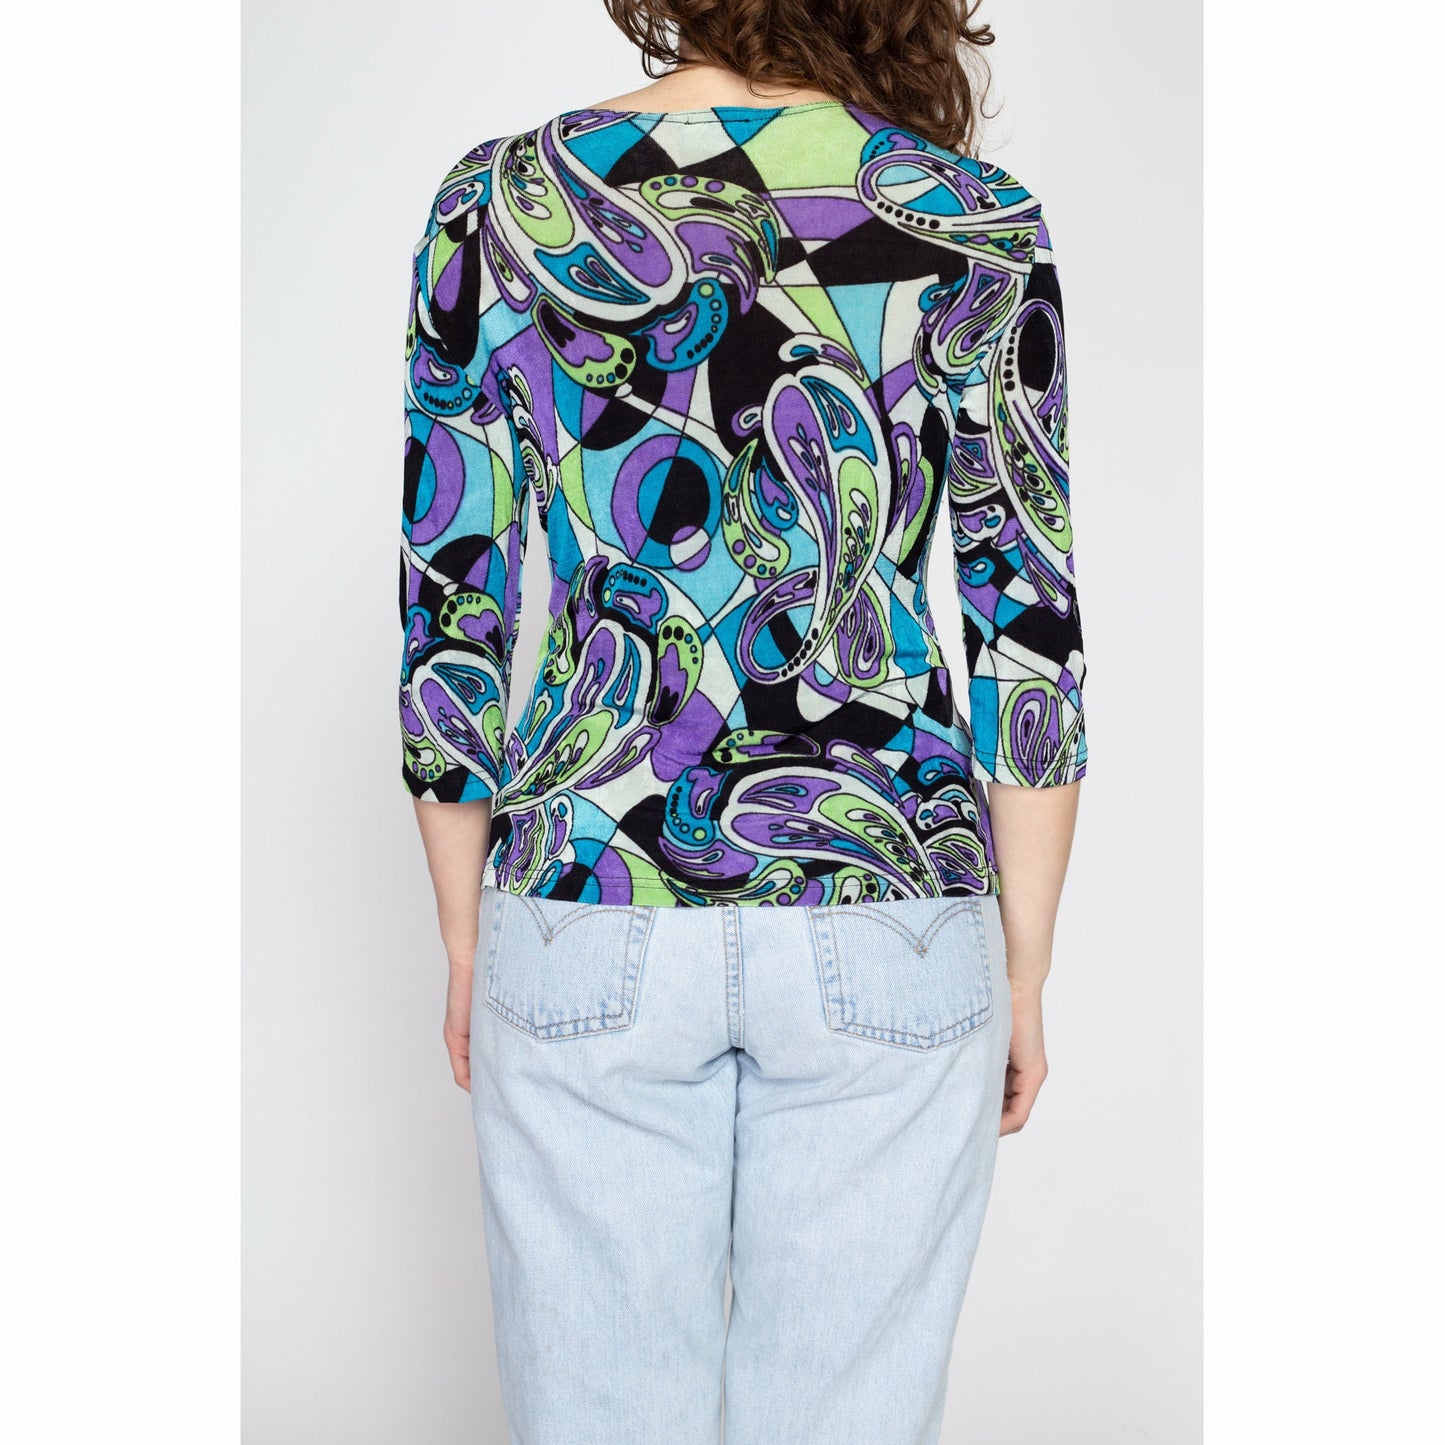 Large 90s Slinky Psychedelic Paisley Print Top | Vintage Black Purple Green Stretchy Abstract Shirt